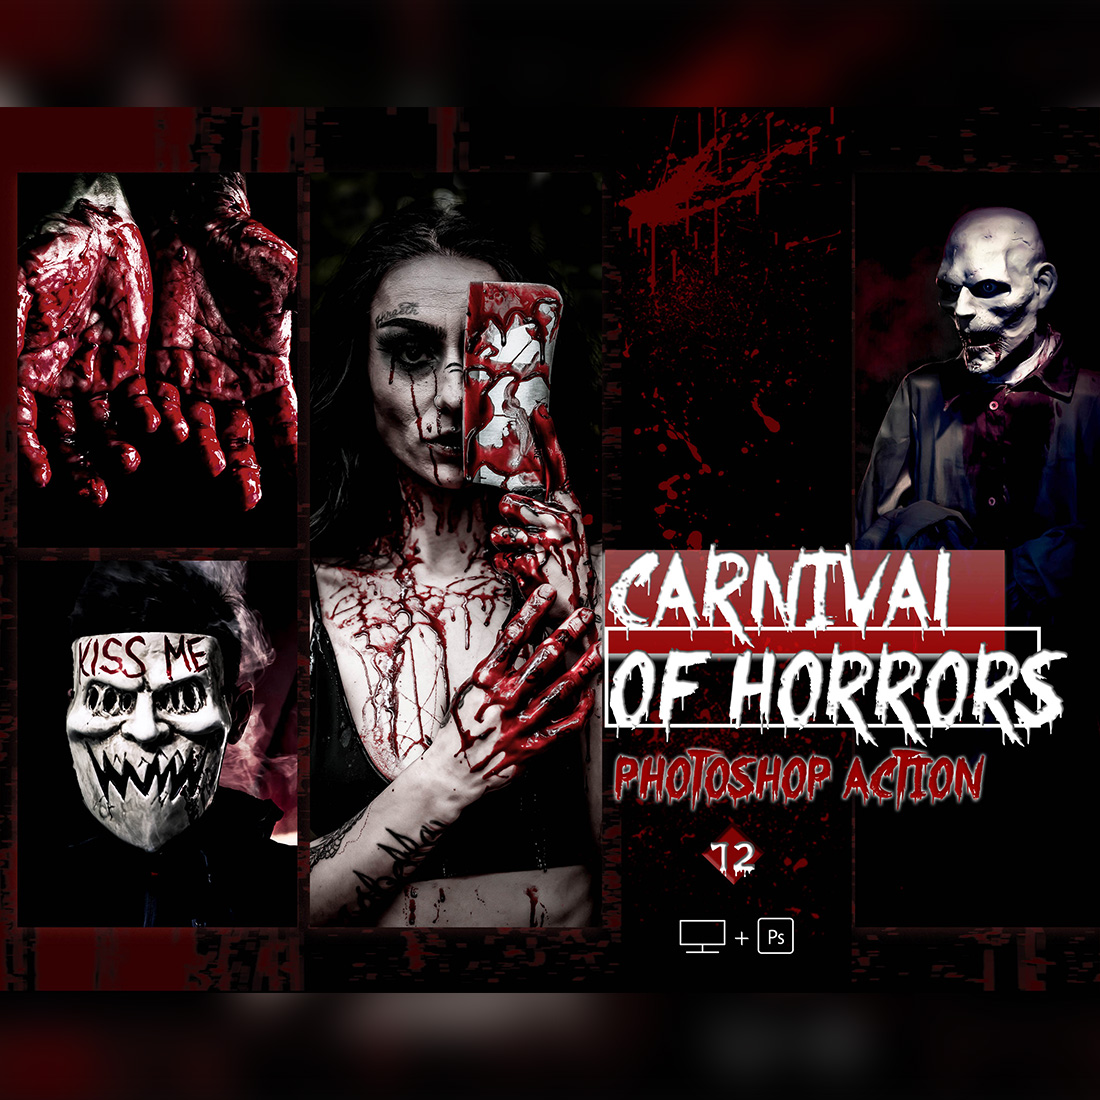 12 Photoshop Actions, Carnival Of Horrors Ps Action, Moody Halloween ACR Preset, Fall Filter, Lifestyle Theme For Instagram, Autumn Presets, Warm portrait cover image.